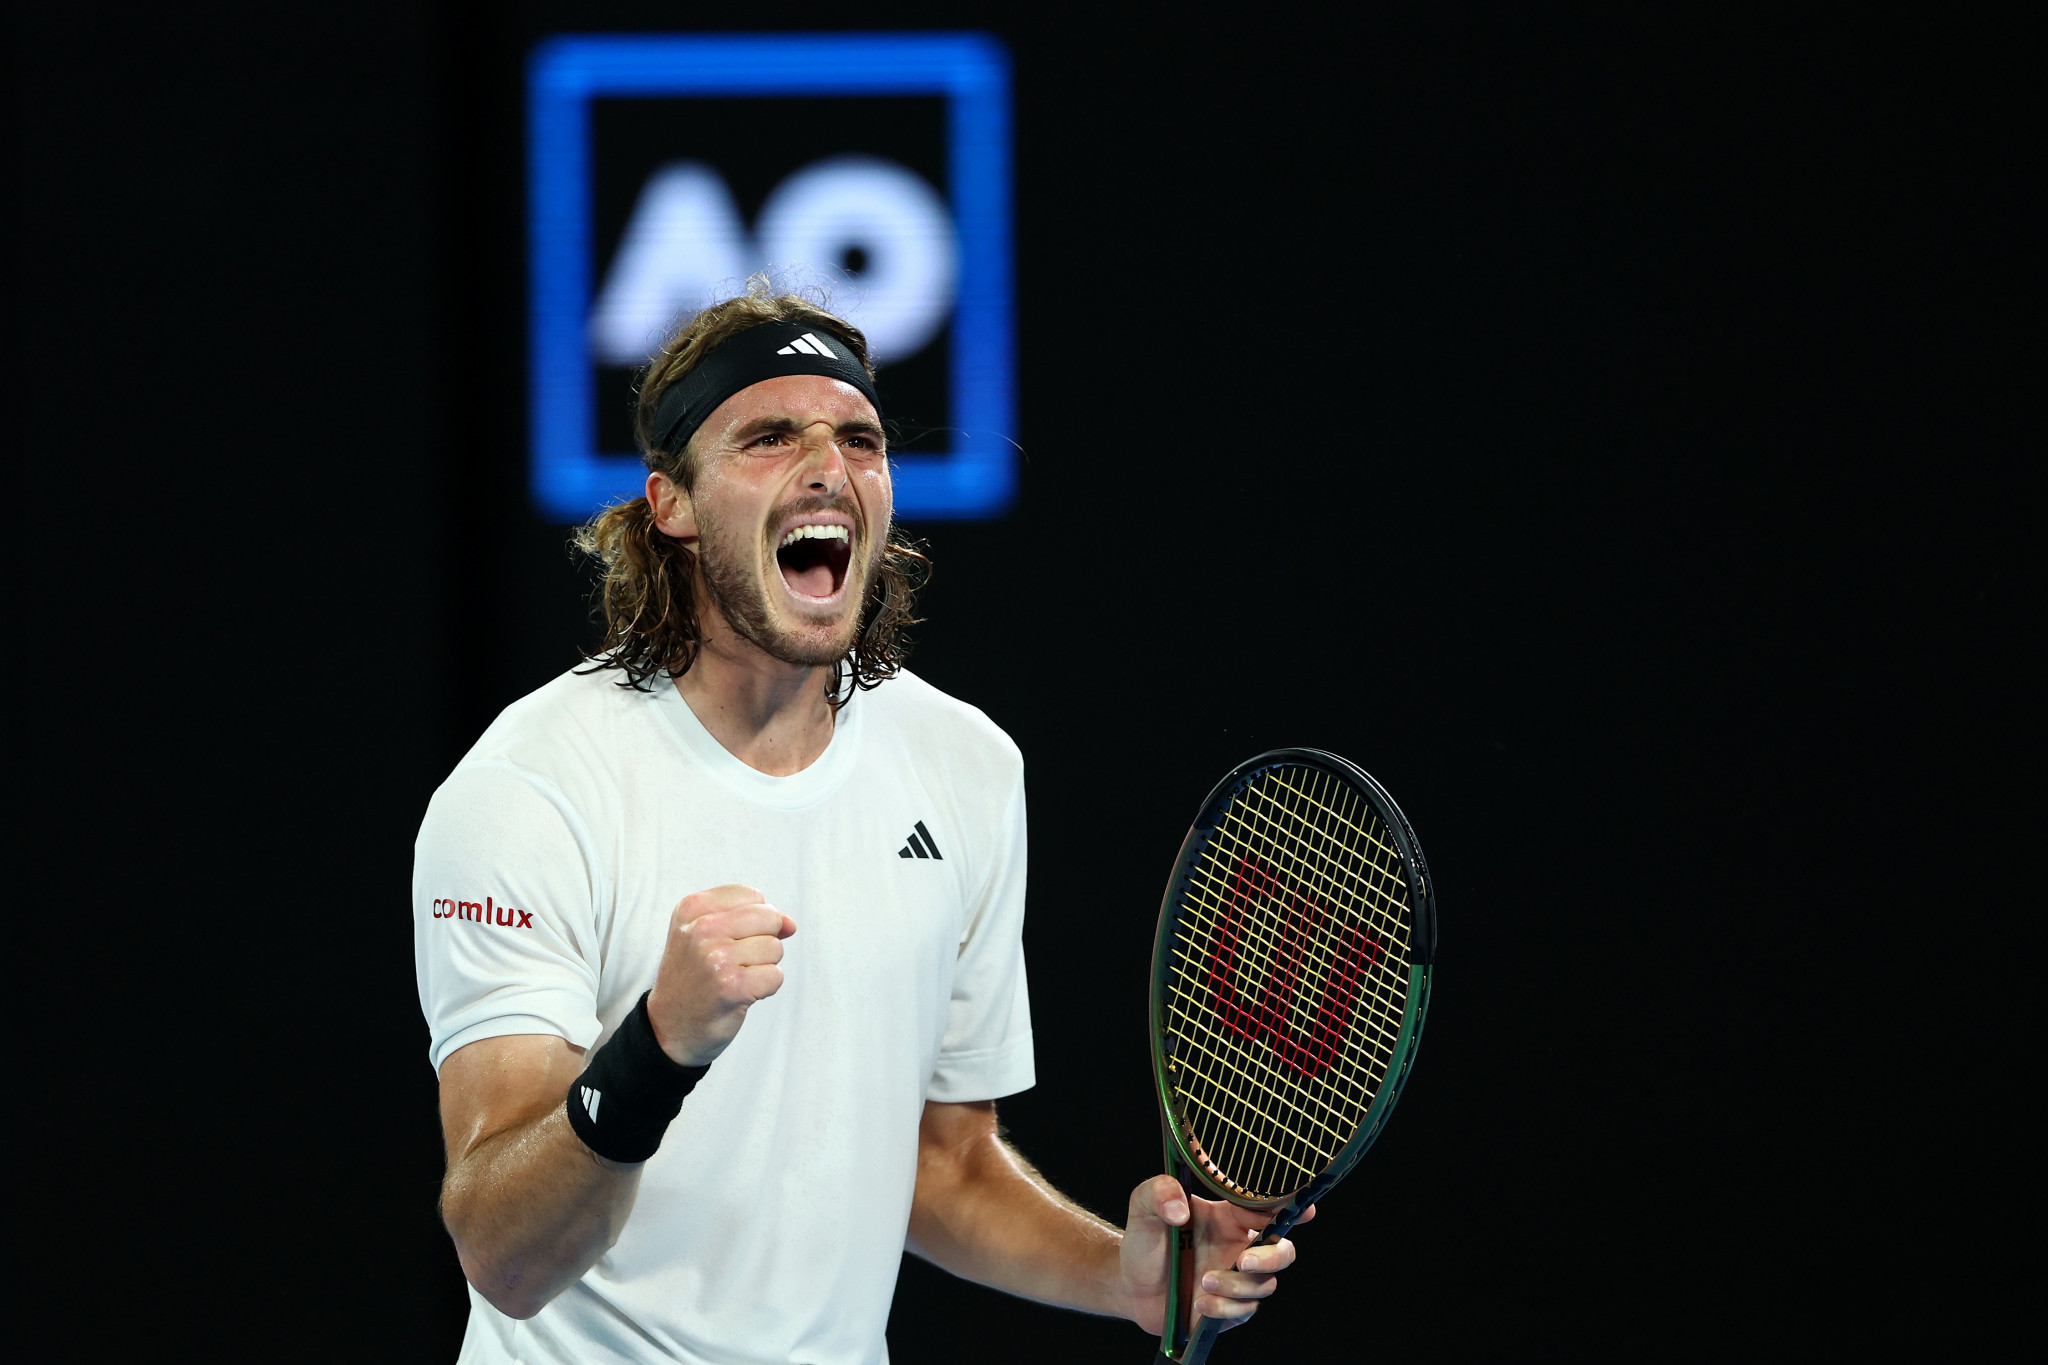 Stefanos Tsitsipas of Greece celebrates after reaching the semi-finals of the Australian Open ©Getty Images